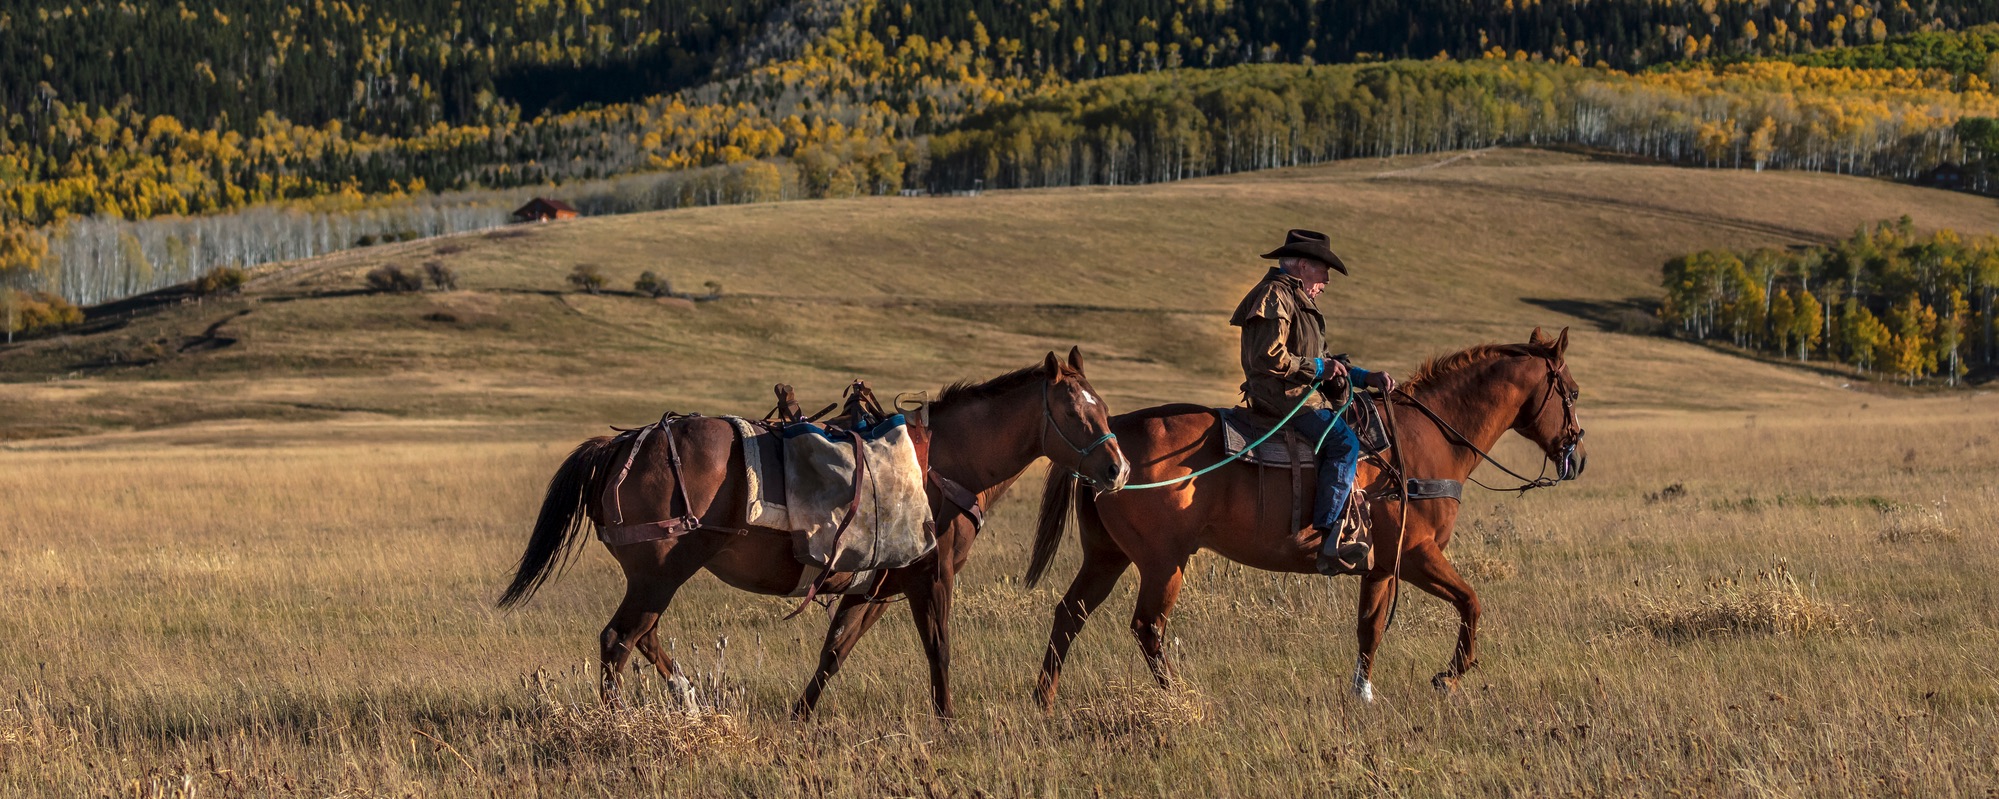 Capturing the essence of the Old West, this photo features a cowboy confidently riding his horse while leading another horse beside him. Both horses and rider are impeccably geared up for a ride, set against the backdrop of an open field surrounded by Aspen trees. The scene evokes a timeless connection between rider, horse, and nature, echoing the spirit of adventure in the picturesque Western landscape.